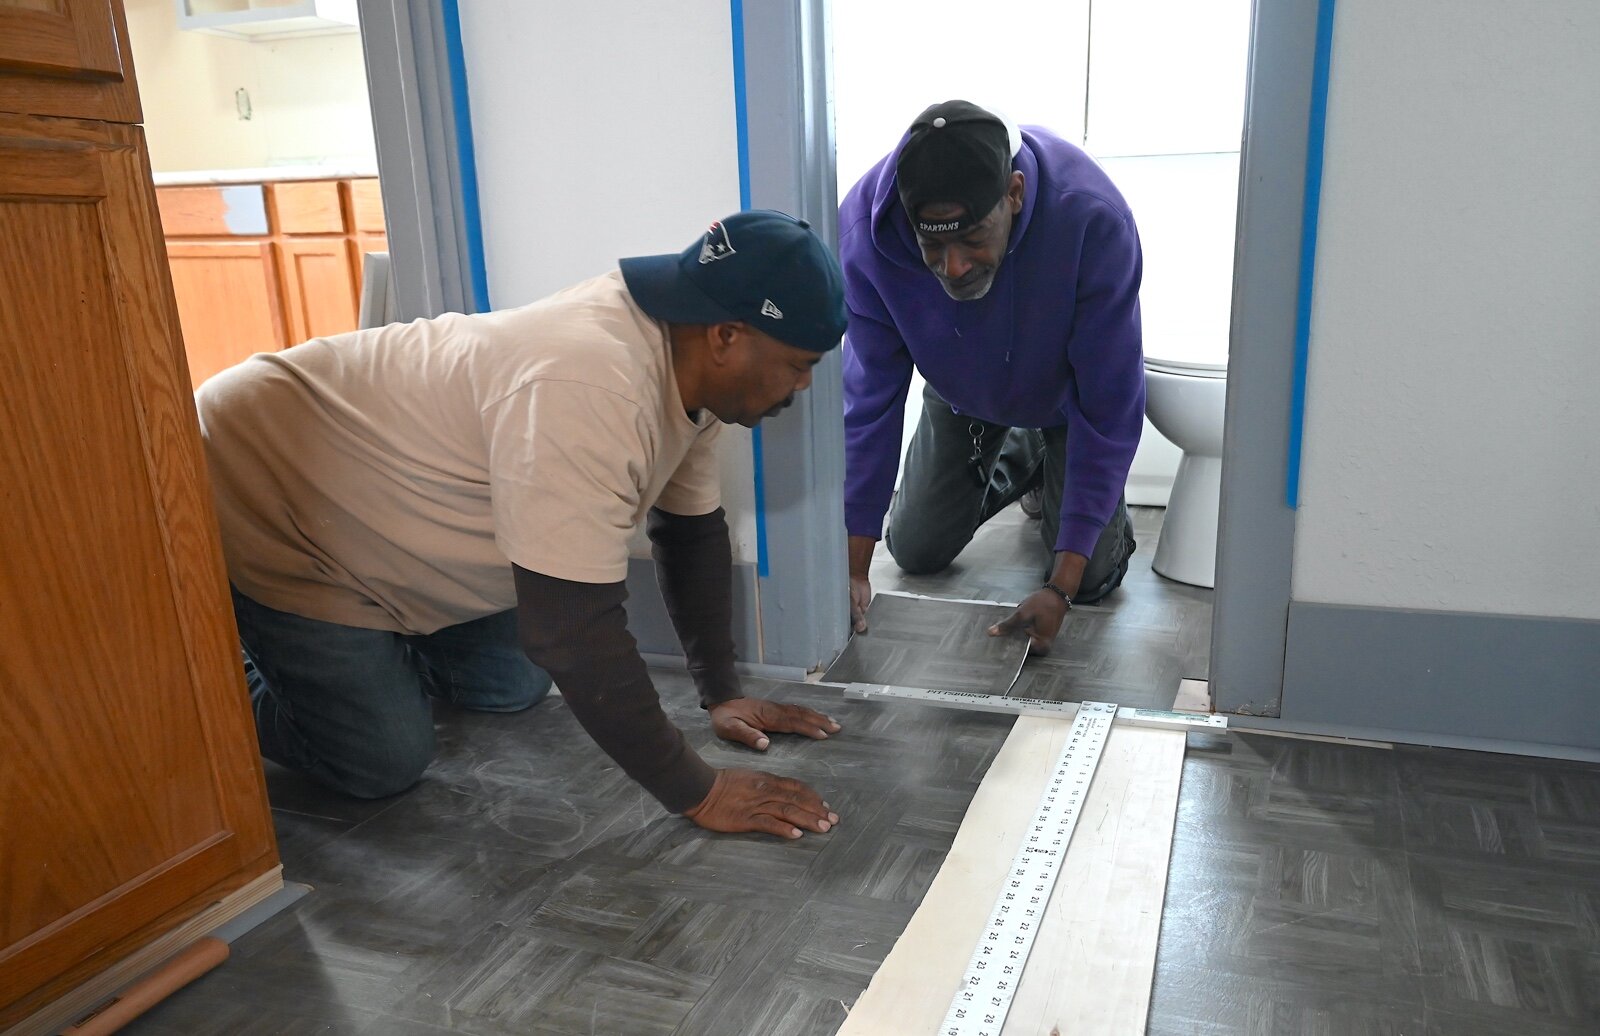 Robert Holley, left, and Aaron Cusic work on the flooring of the house at 238 Greenwood Avenue that Washington Heights United Methodist Church bought and is renovating.